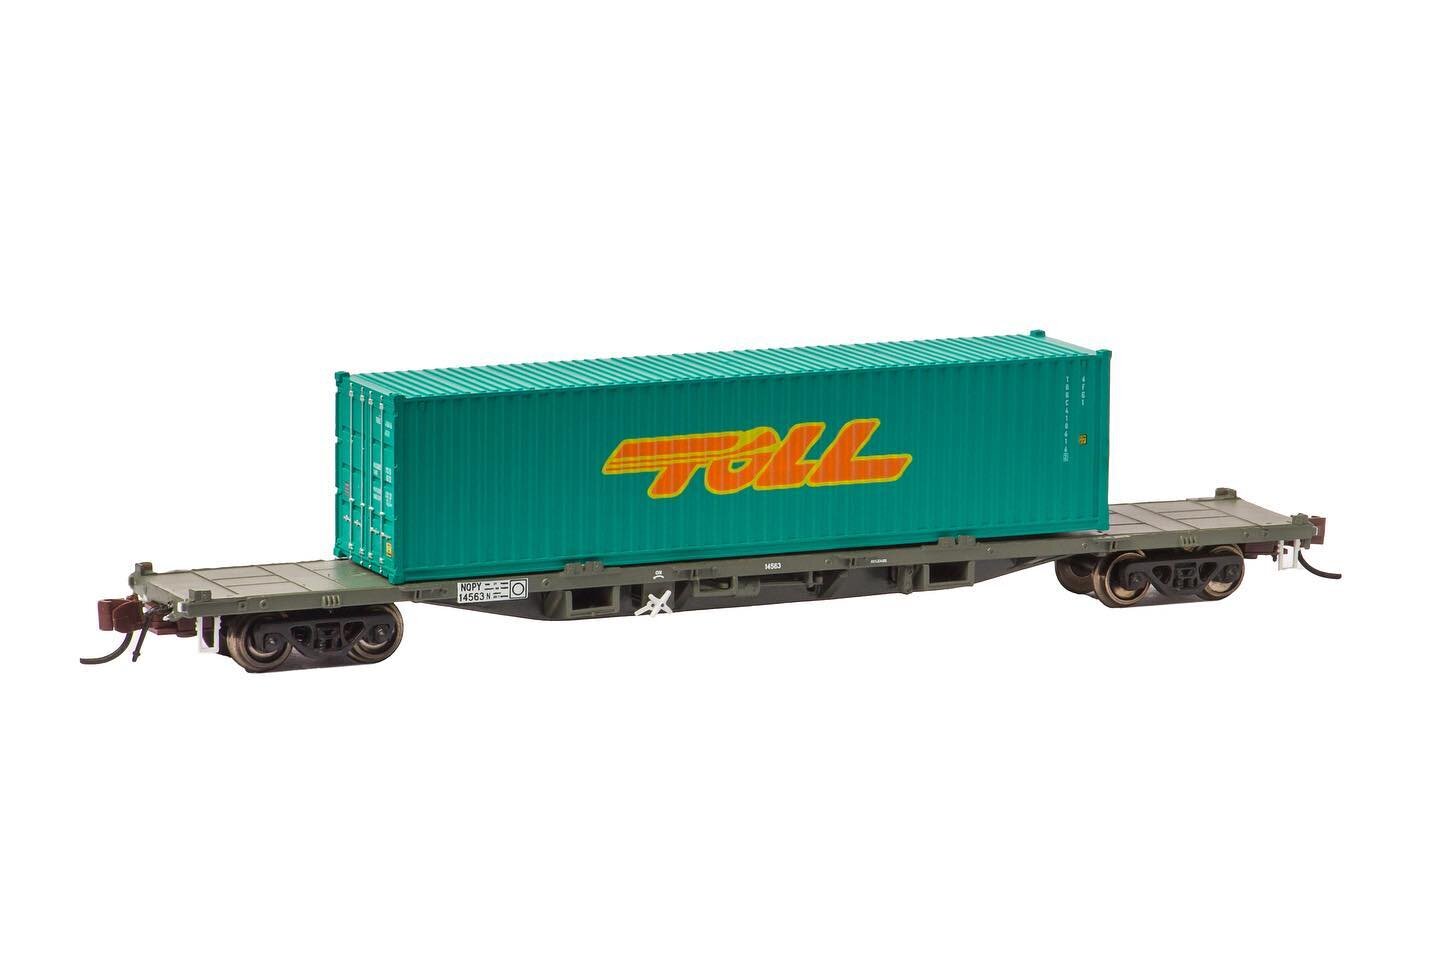 Second Aussie container now available! Available from my website 
#Modeltrains #nscale #modelrailway #modelrailroad